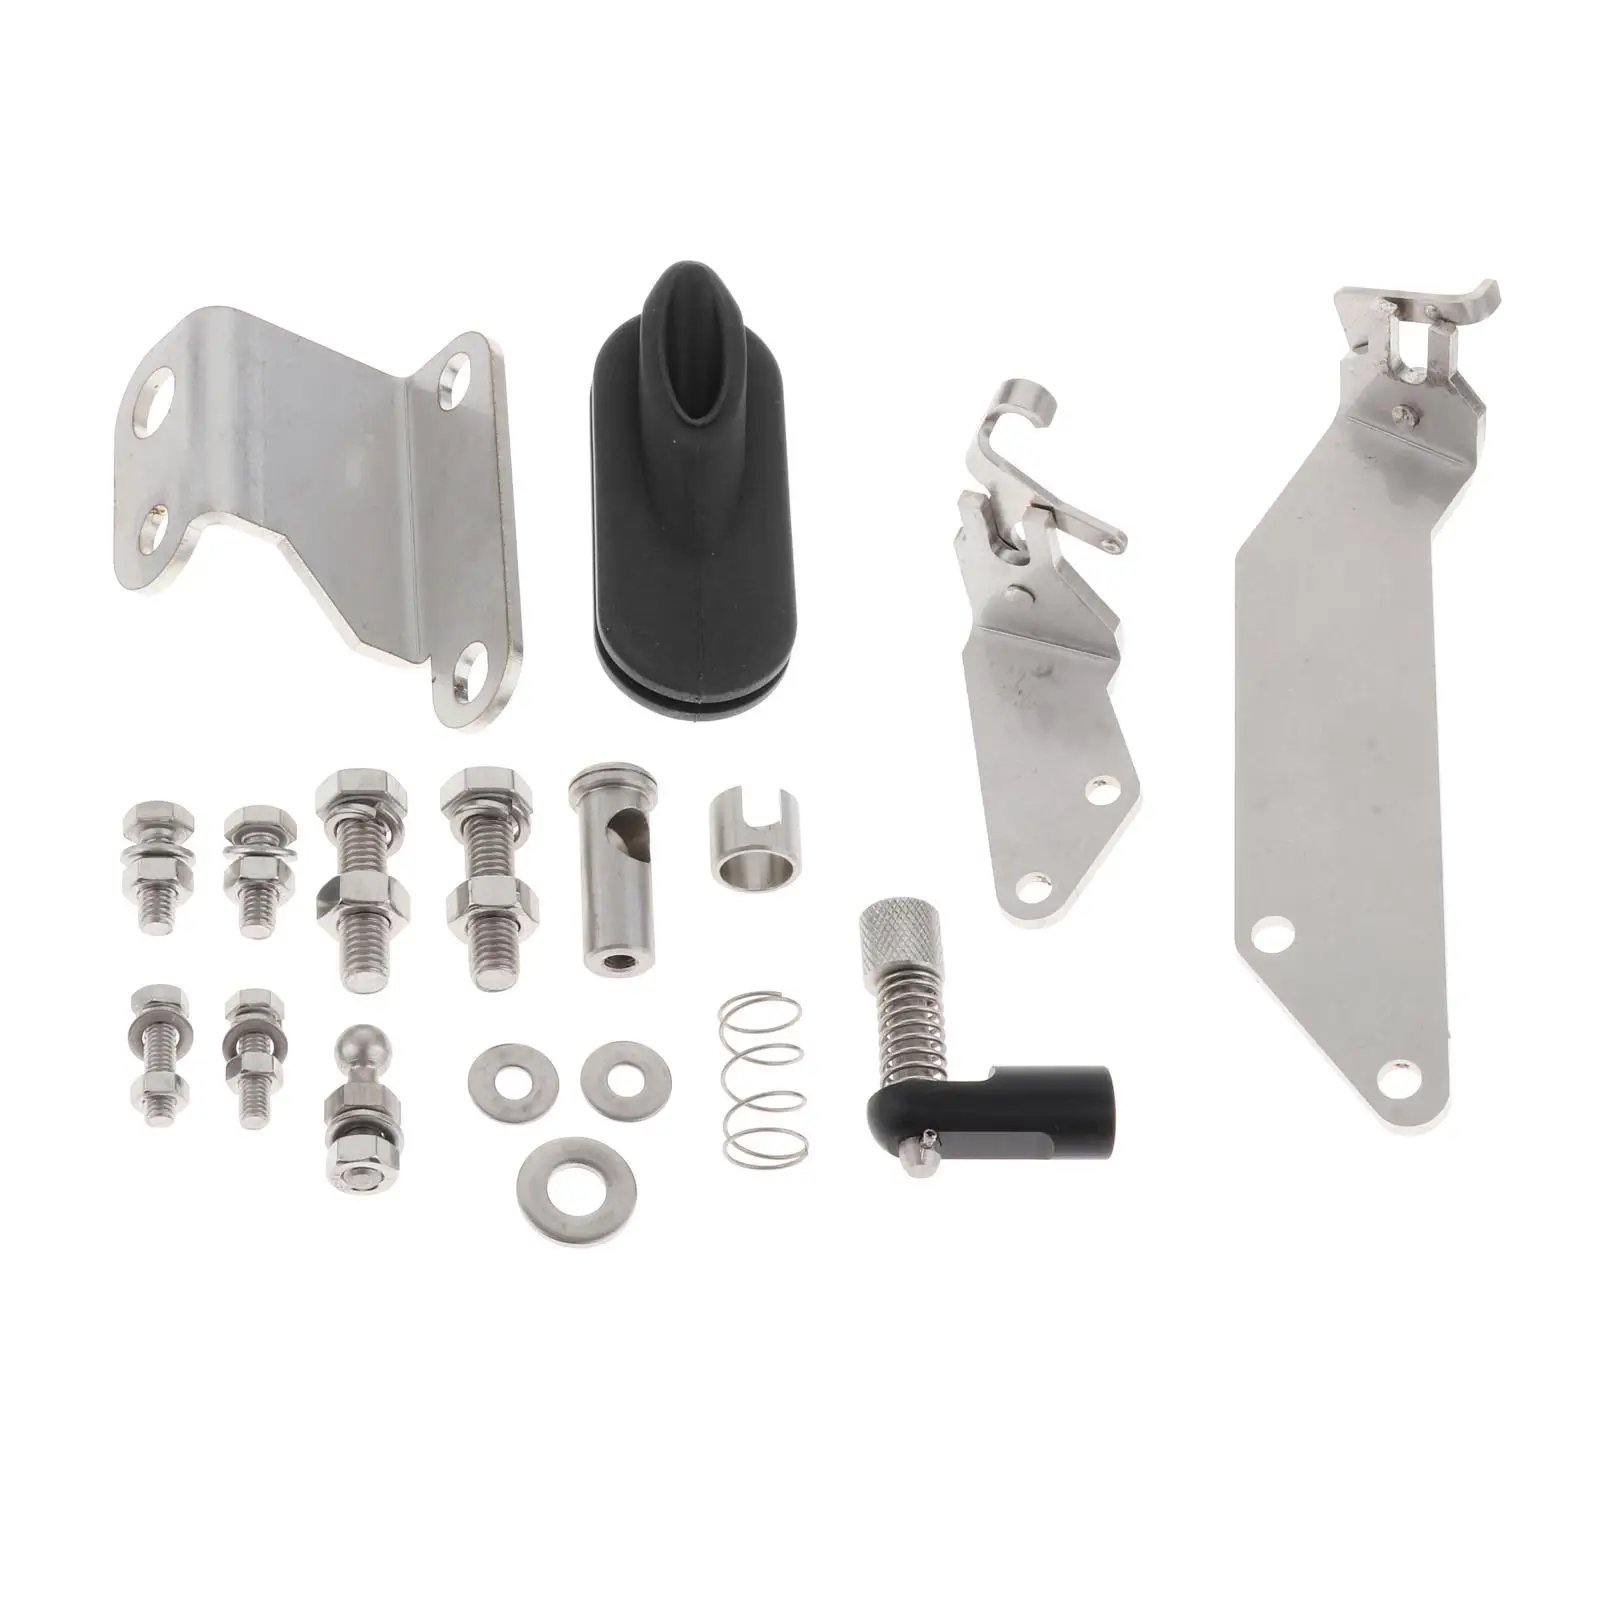 Remote Control Fitting Kit for Tohatsu Outboard Motor 9.9HP 15HP 18HP 398-83880; 398838801M